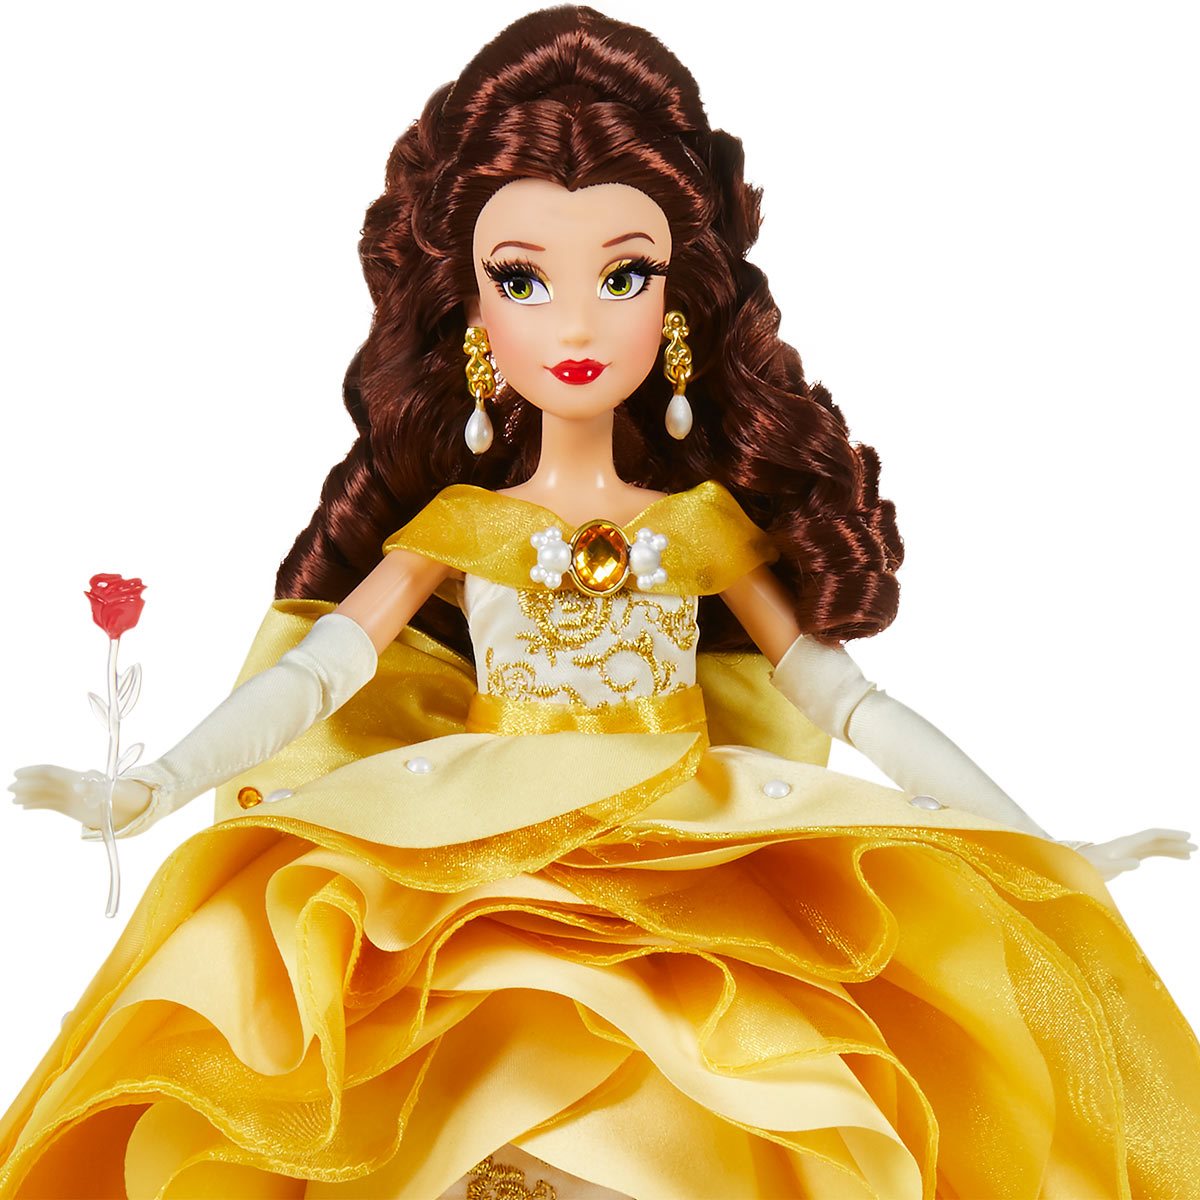 Disney Princess Belle Fashion Doll And Accessory, Toy Inspired By the Movie  Beauty And the Beast